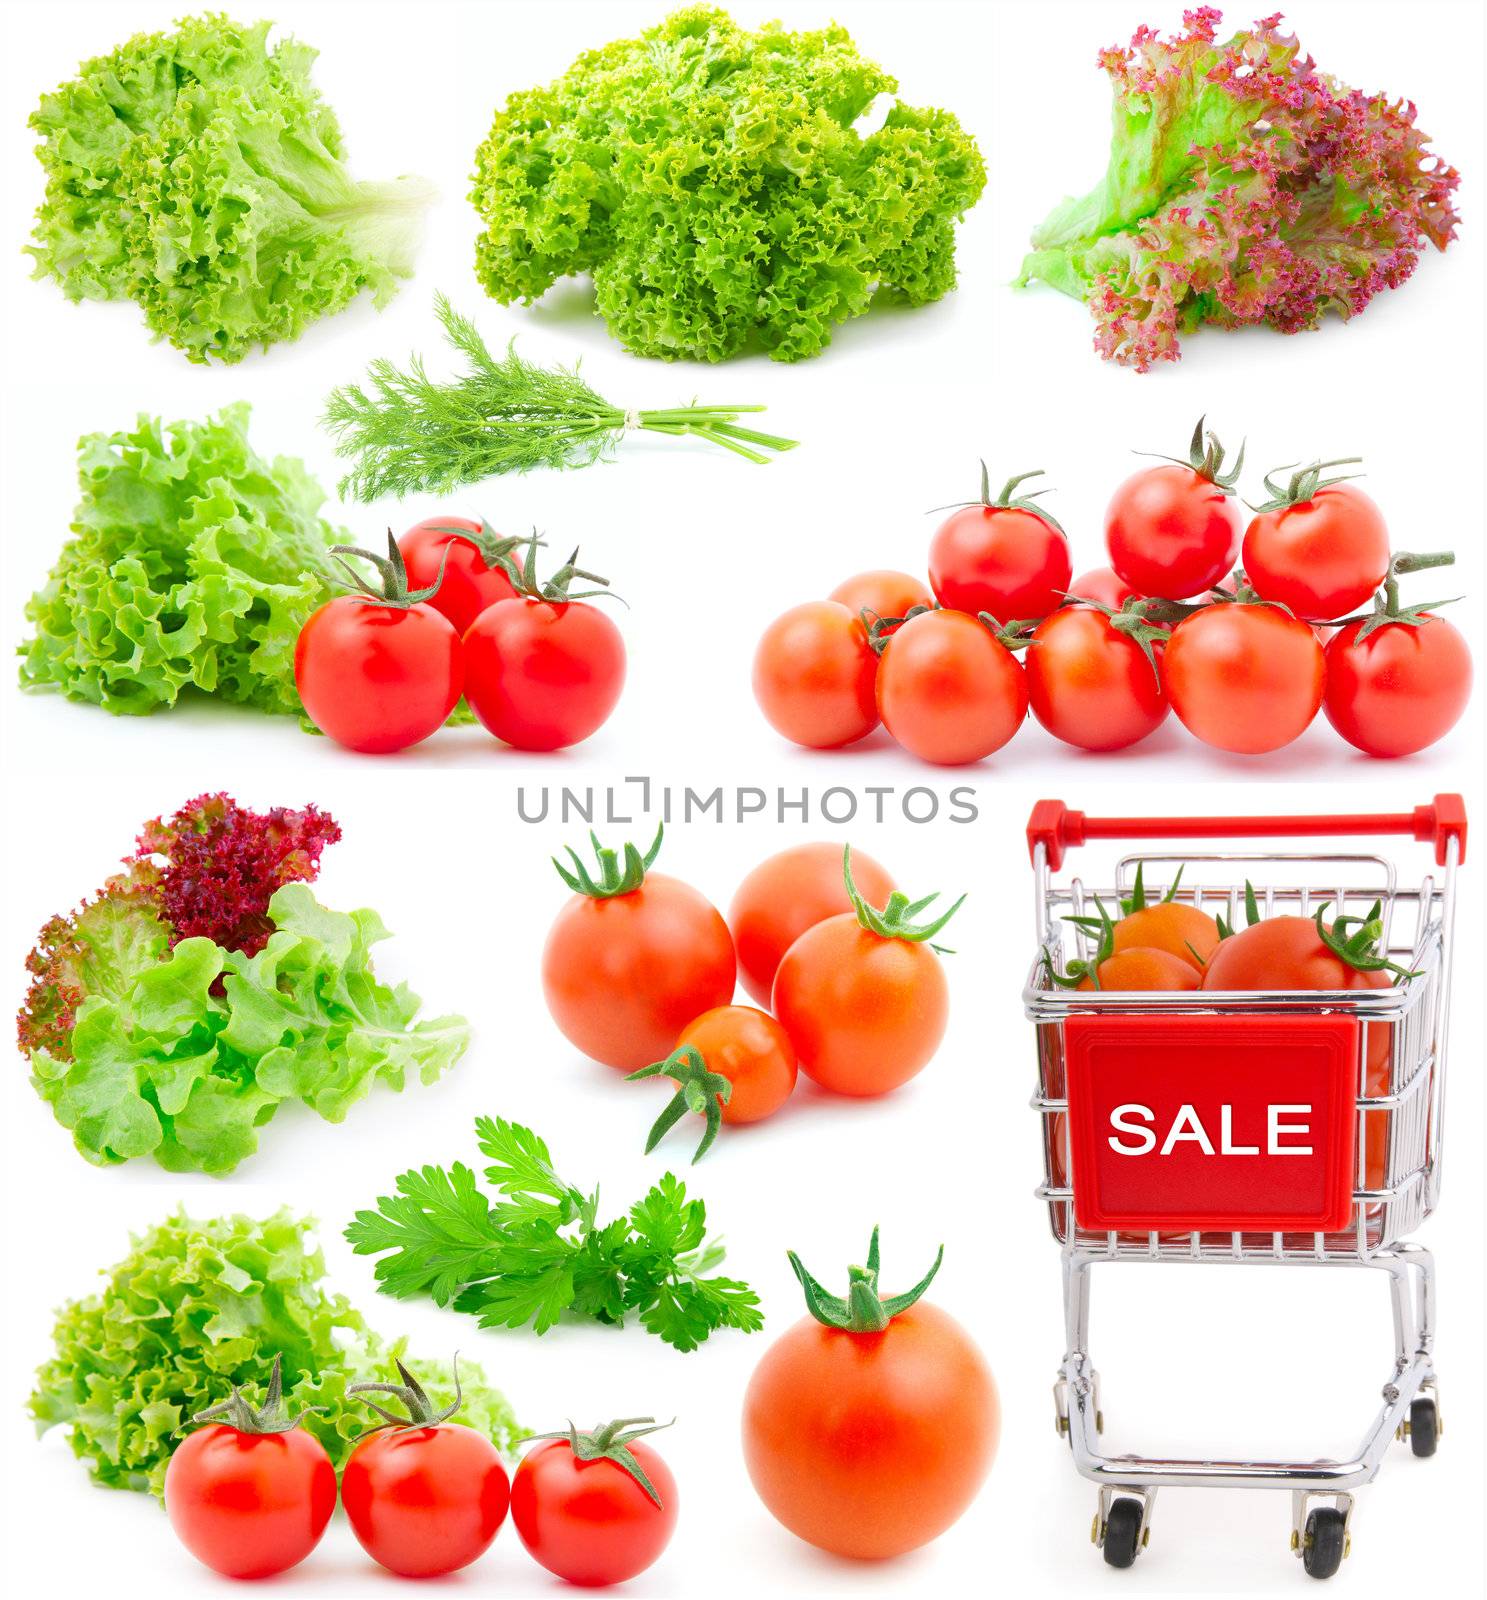 Assortment of red cherry tomatoes and lettuce leaves, isolated on white background